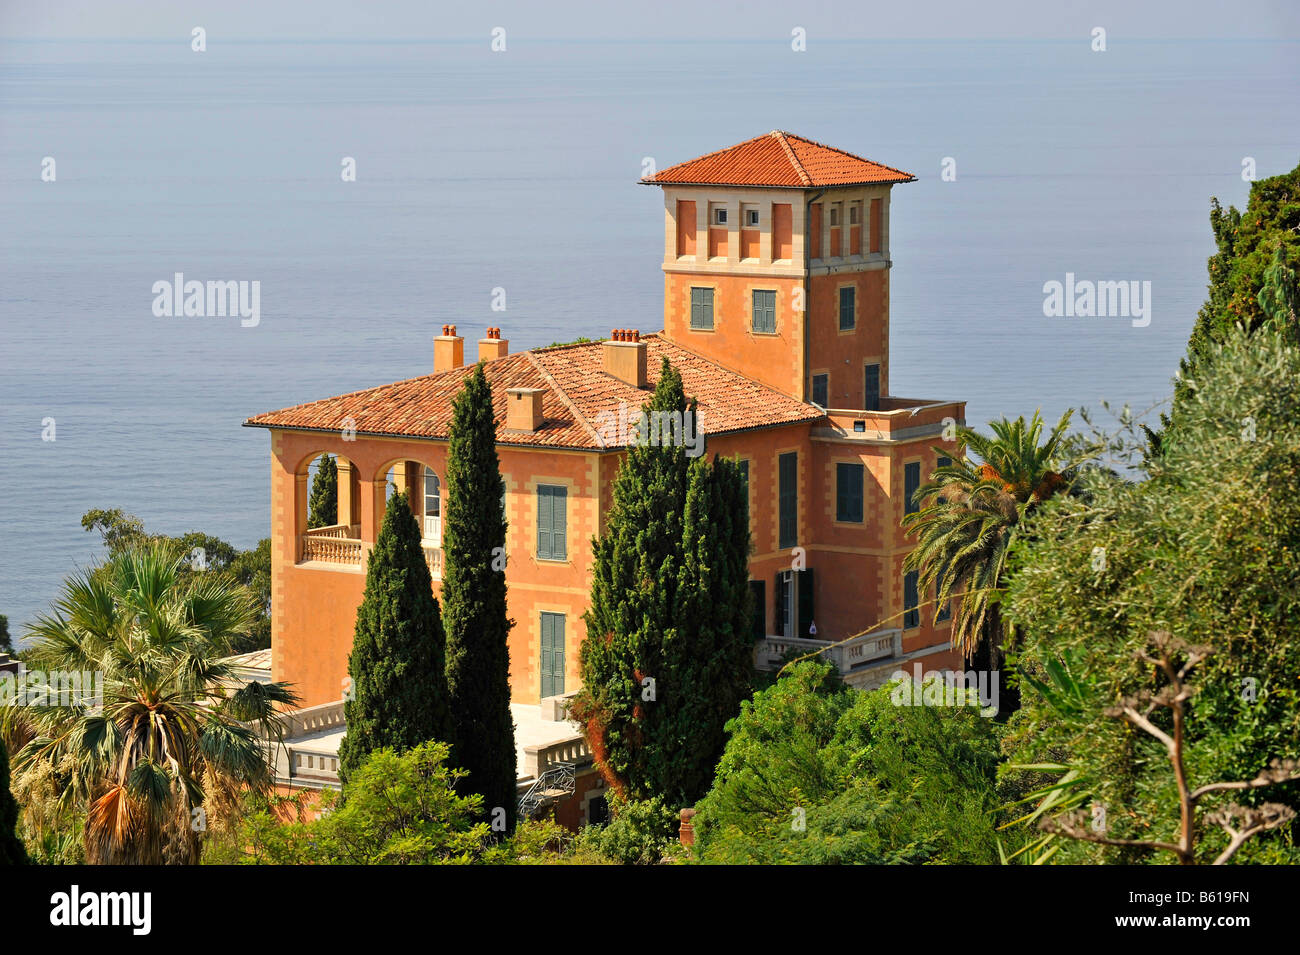 Villa Hanbury High Resolution Stock Photography and Images - Alamy